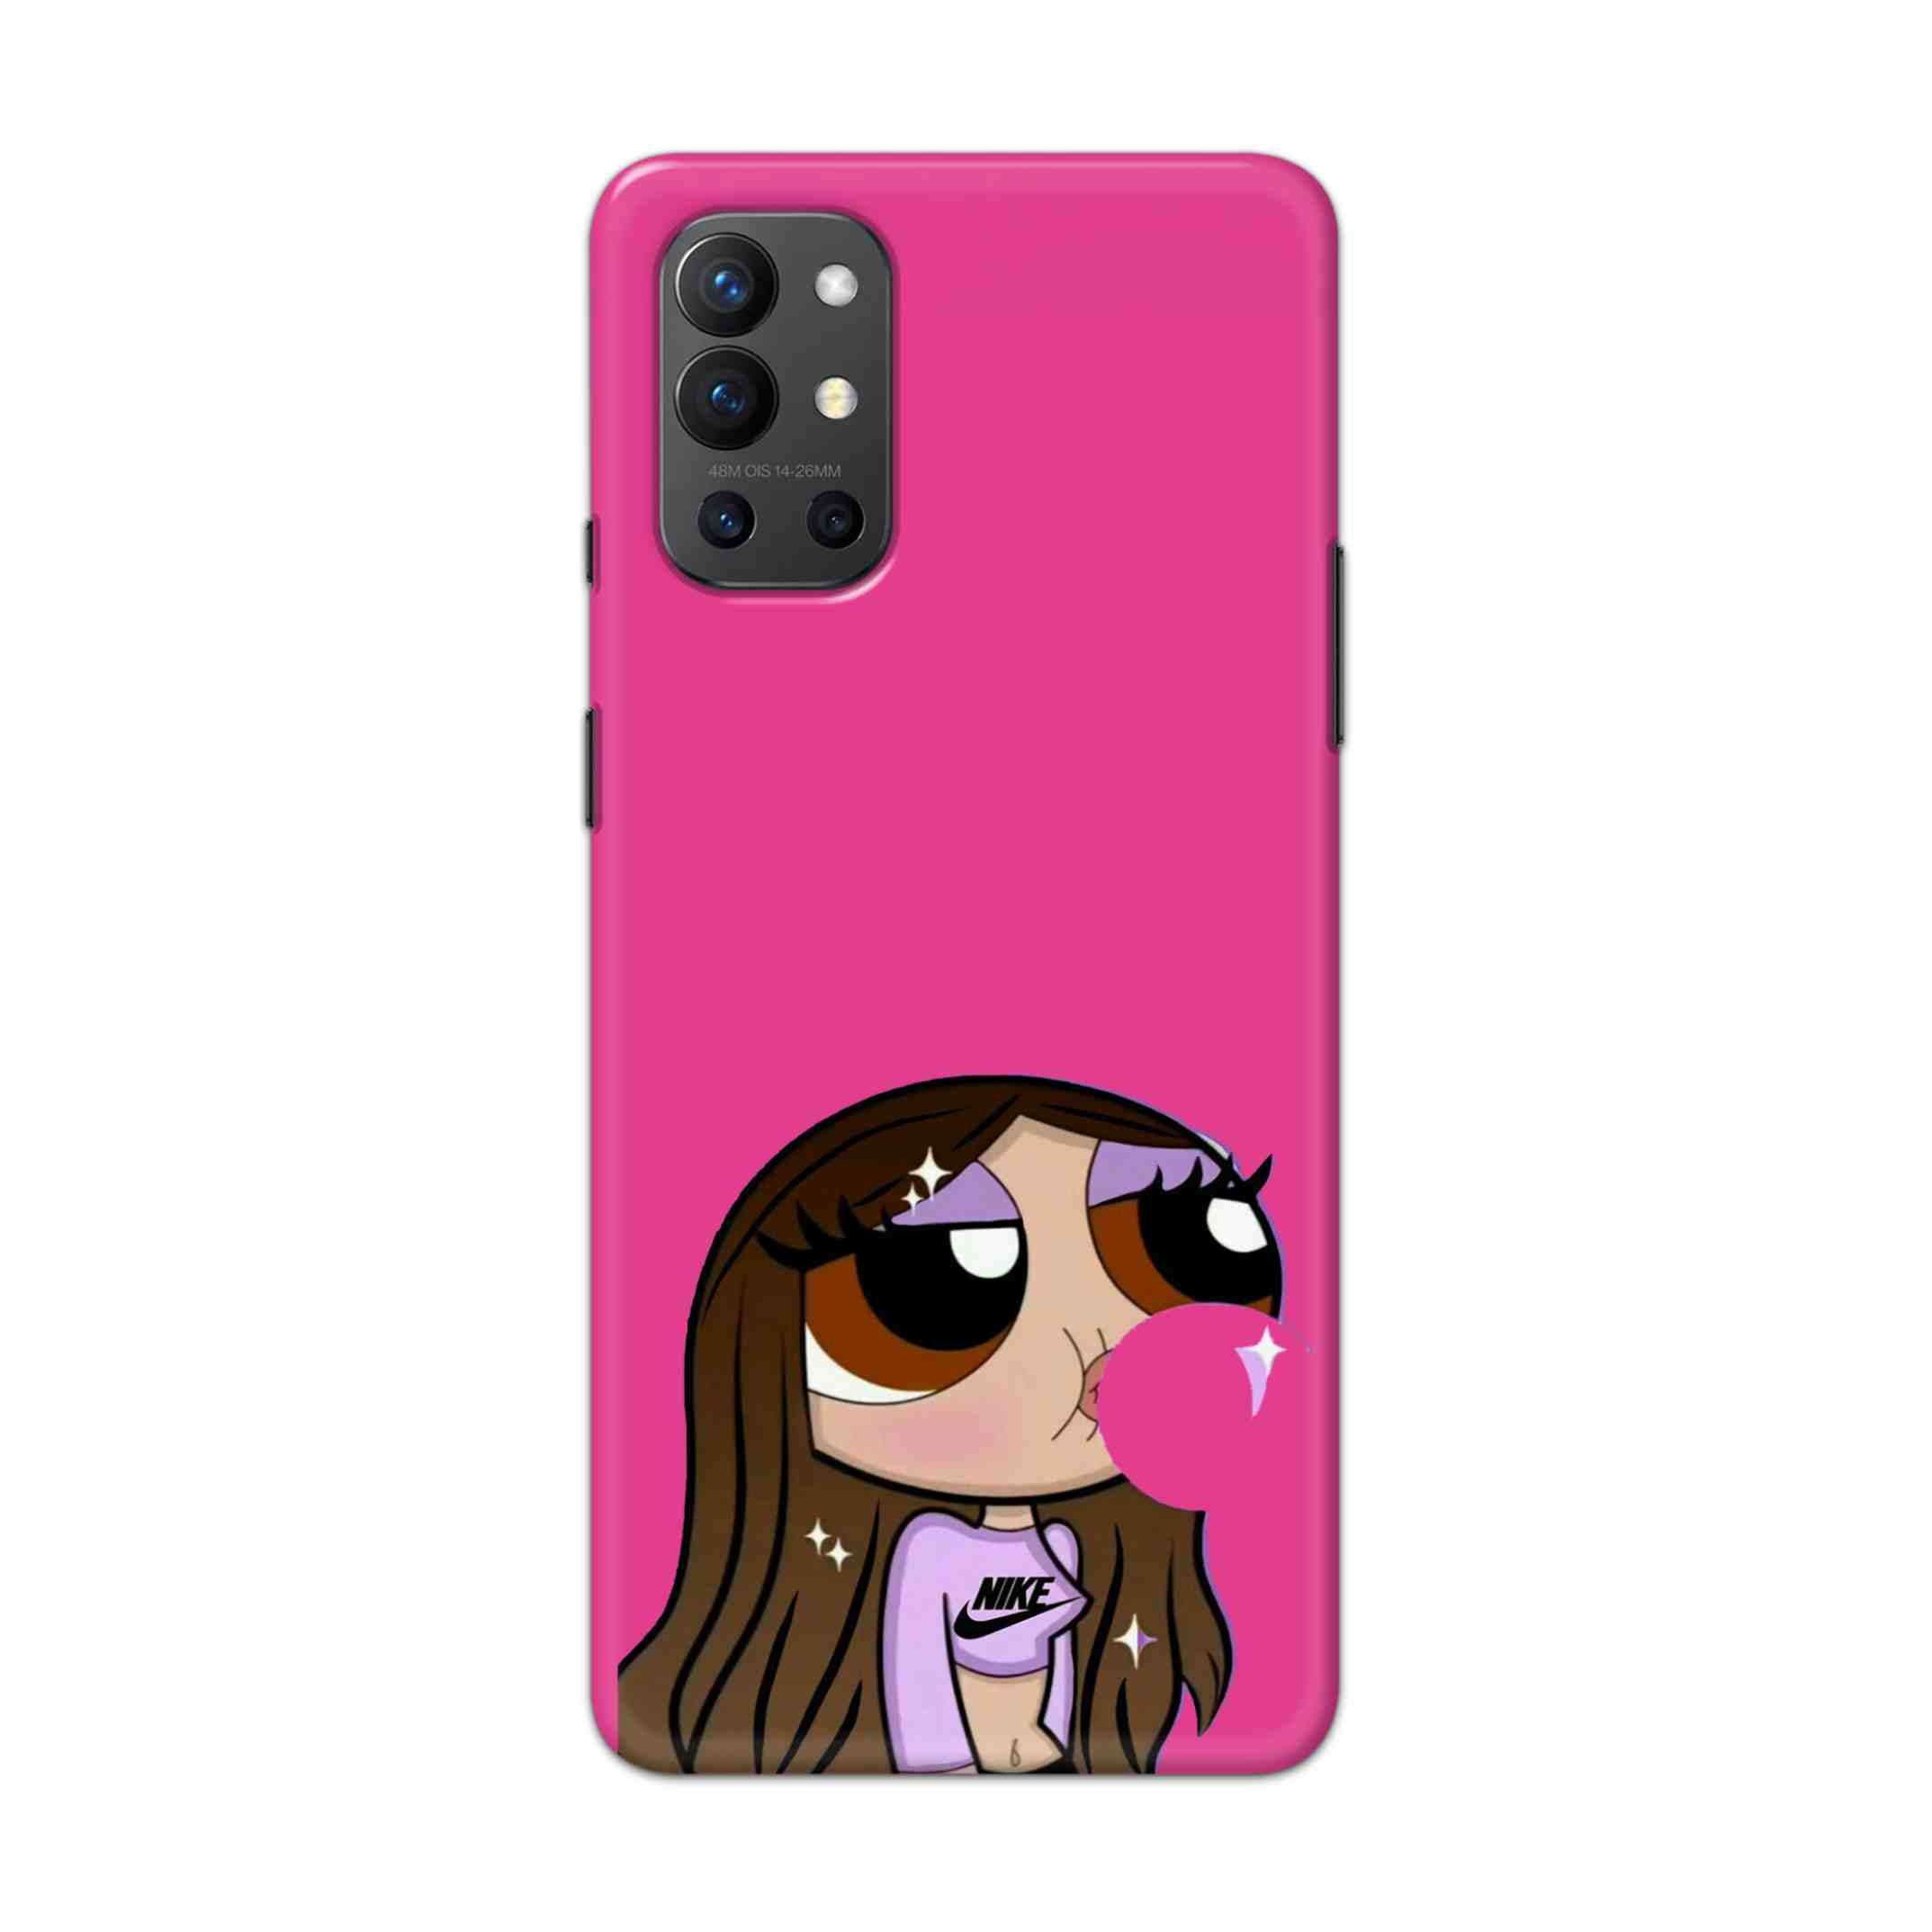 Buy Bubble Girl Hard Back Mobile Phone Case Cover For OnePlus 9R / 8T Online